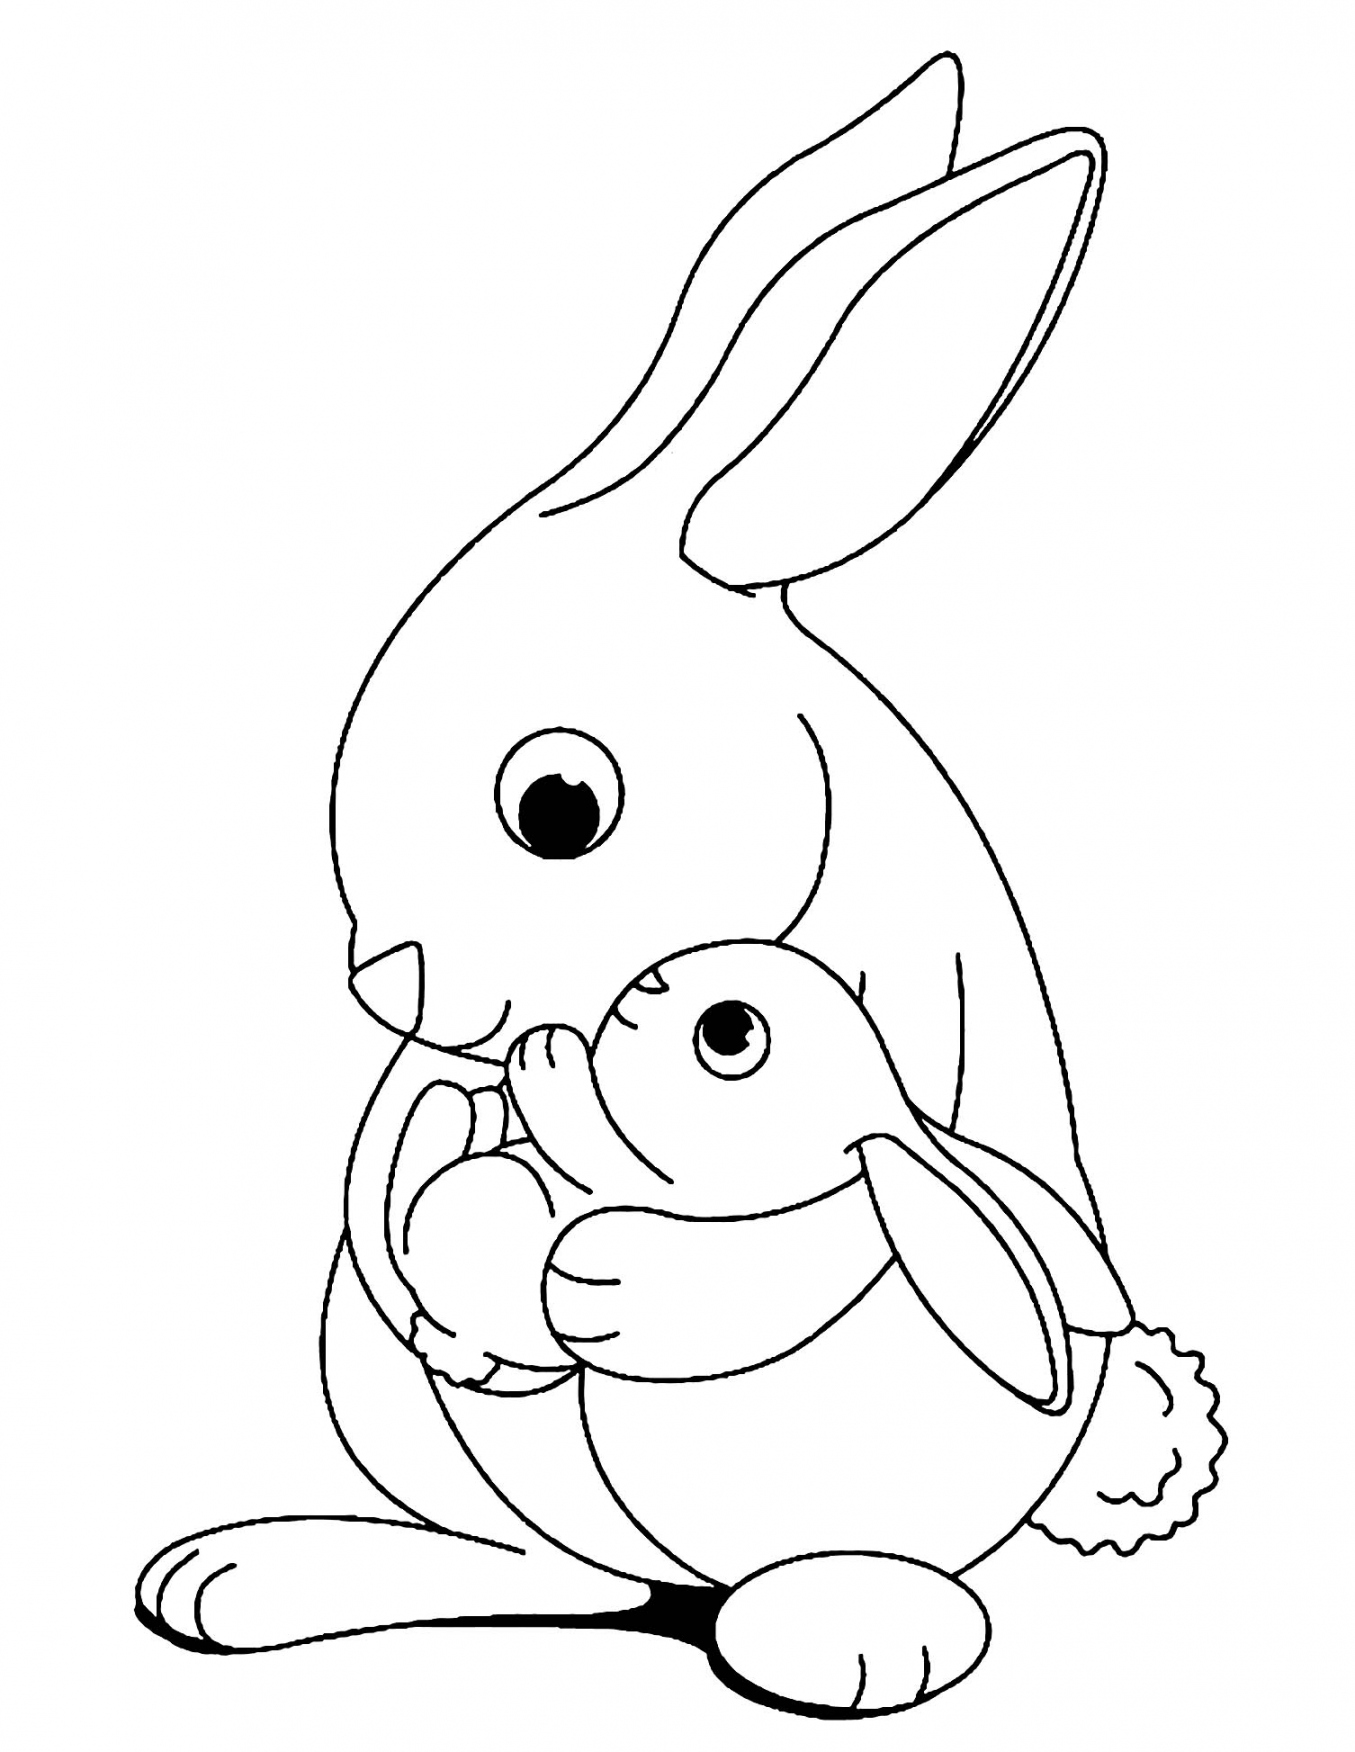 Free rabbit coloring pages to color - Rabbit Kids Coloring Pages - FREE Printables - Bunny Coloring Pages Free Printable